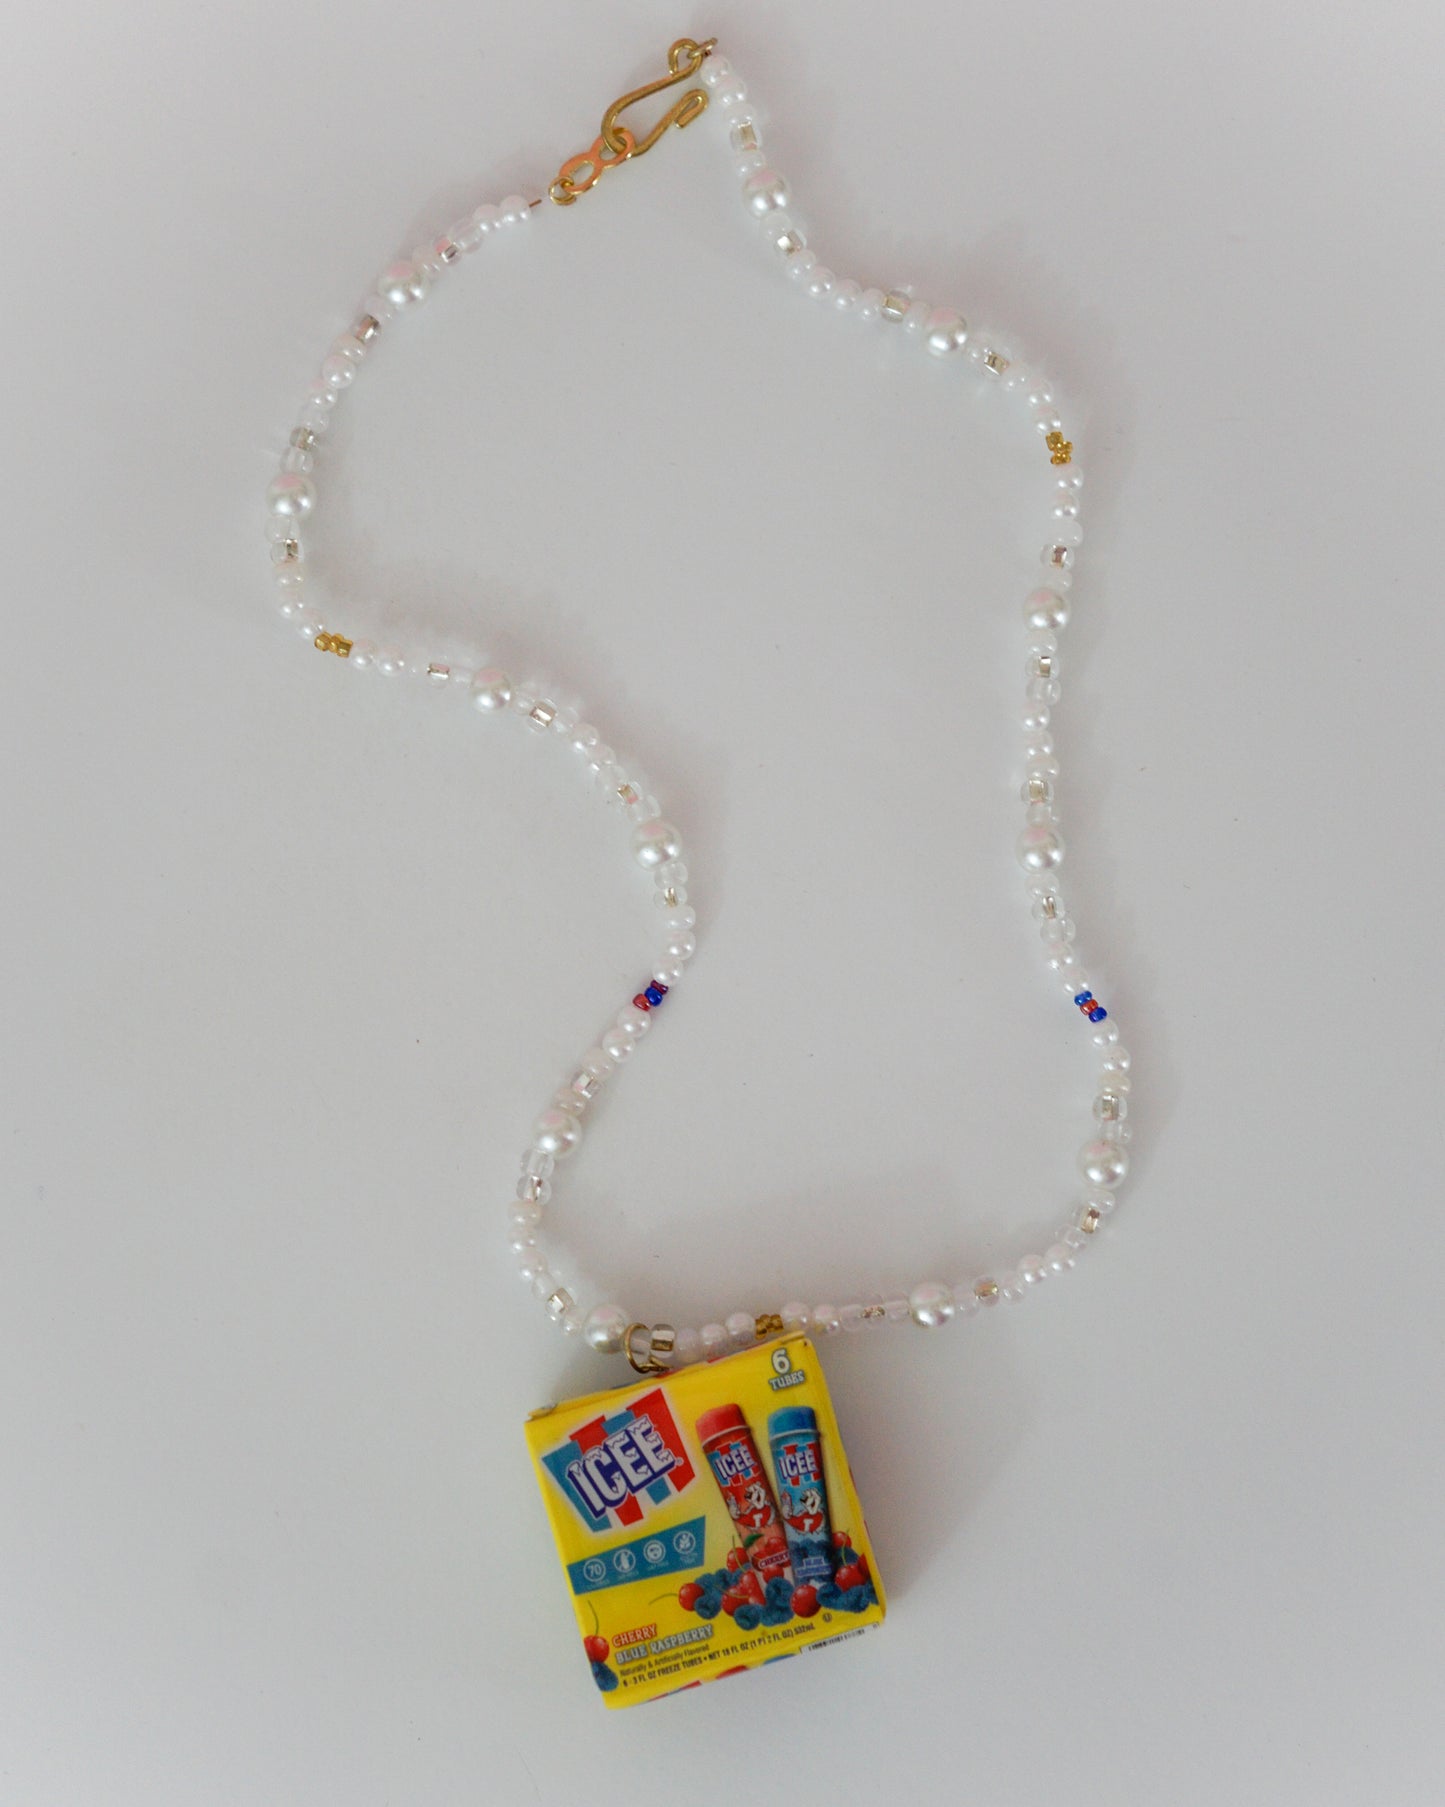 ICEE Pearl Necklace